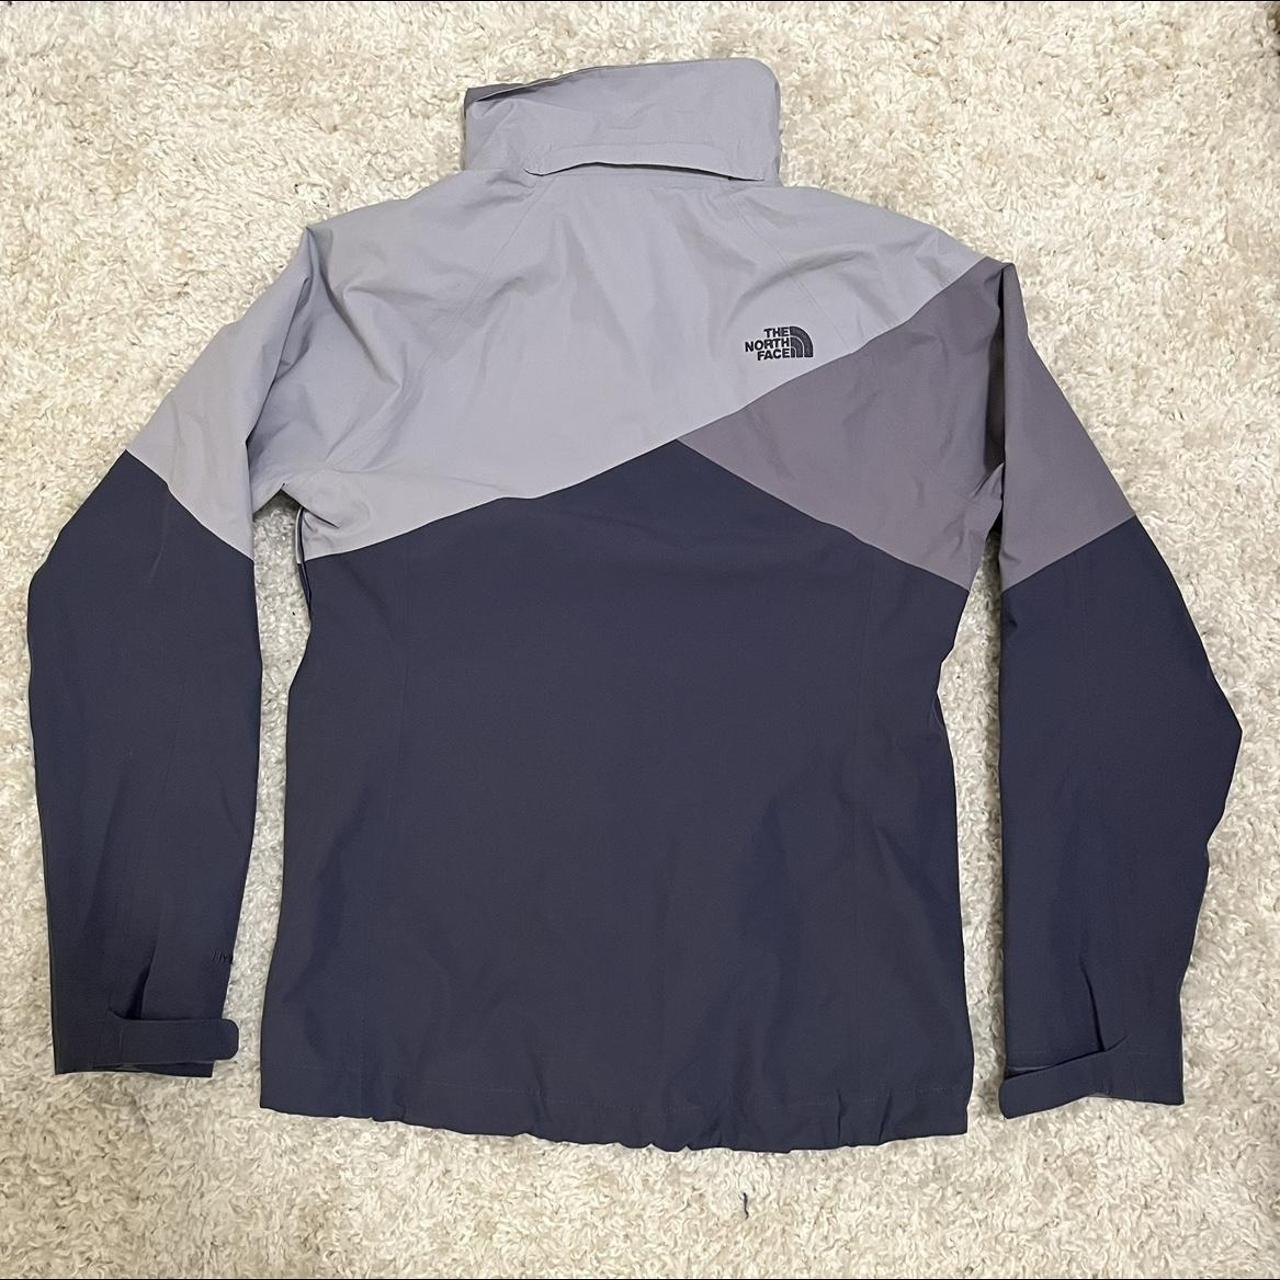 The North Face Women's Grey Coat (2)